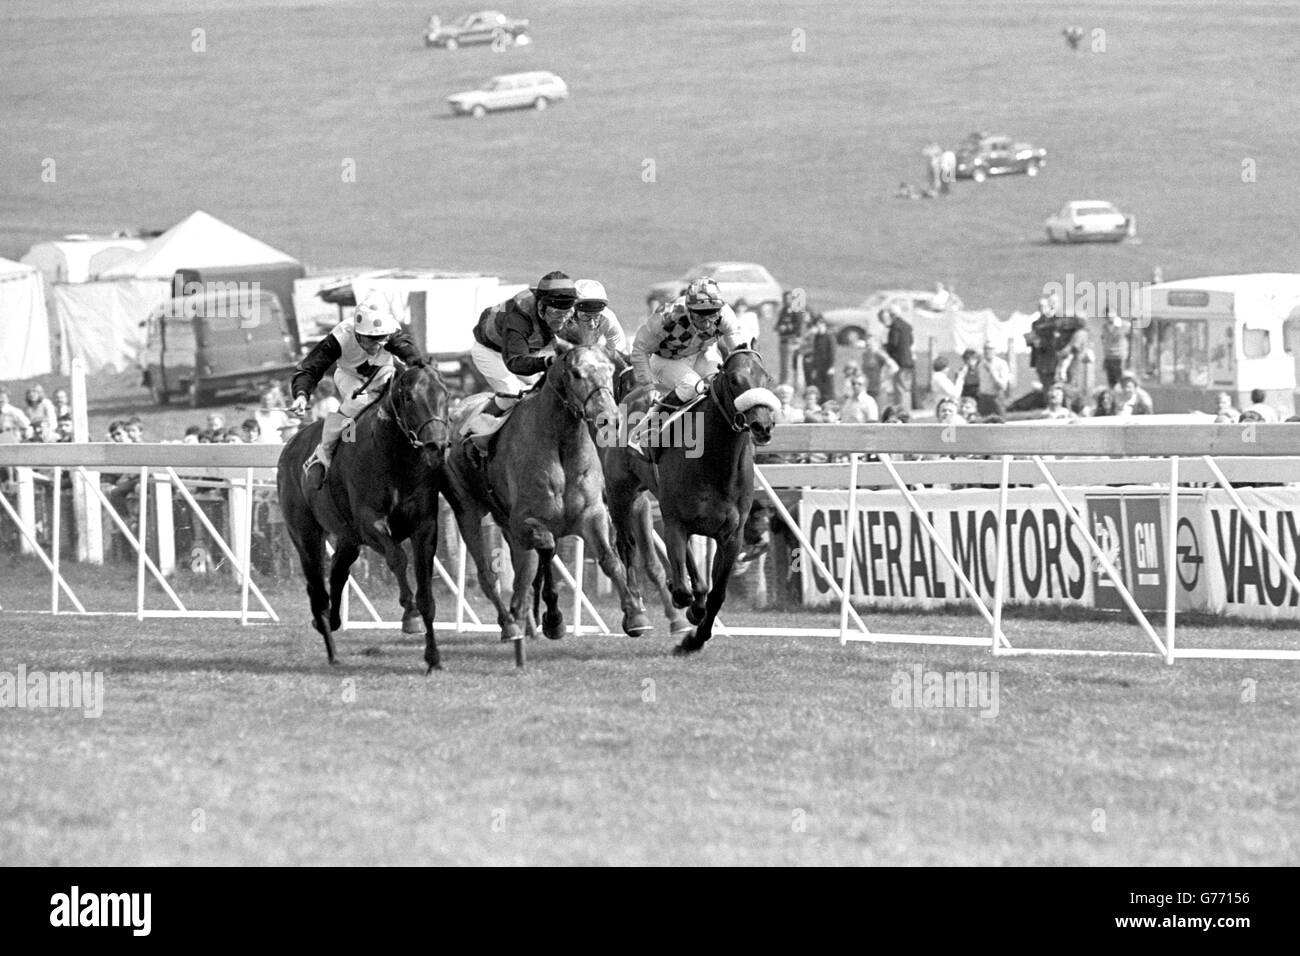 Count Pahlen (centre), with Geoff Baxter riding, wins the Blue Riband Trial Stakes at Epsom, followed by Steel Bay with J Reid (left) and Vin St Benet with R Curant (right). Behind in fourth place is Lester Piggott on Bancario. Stock Photo